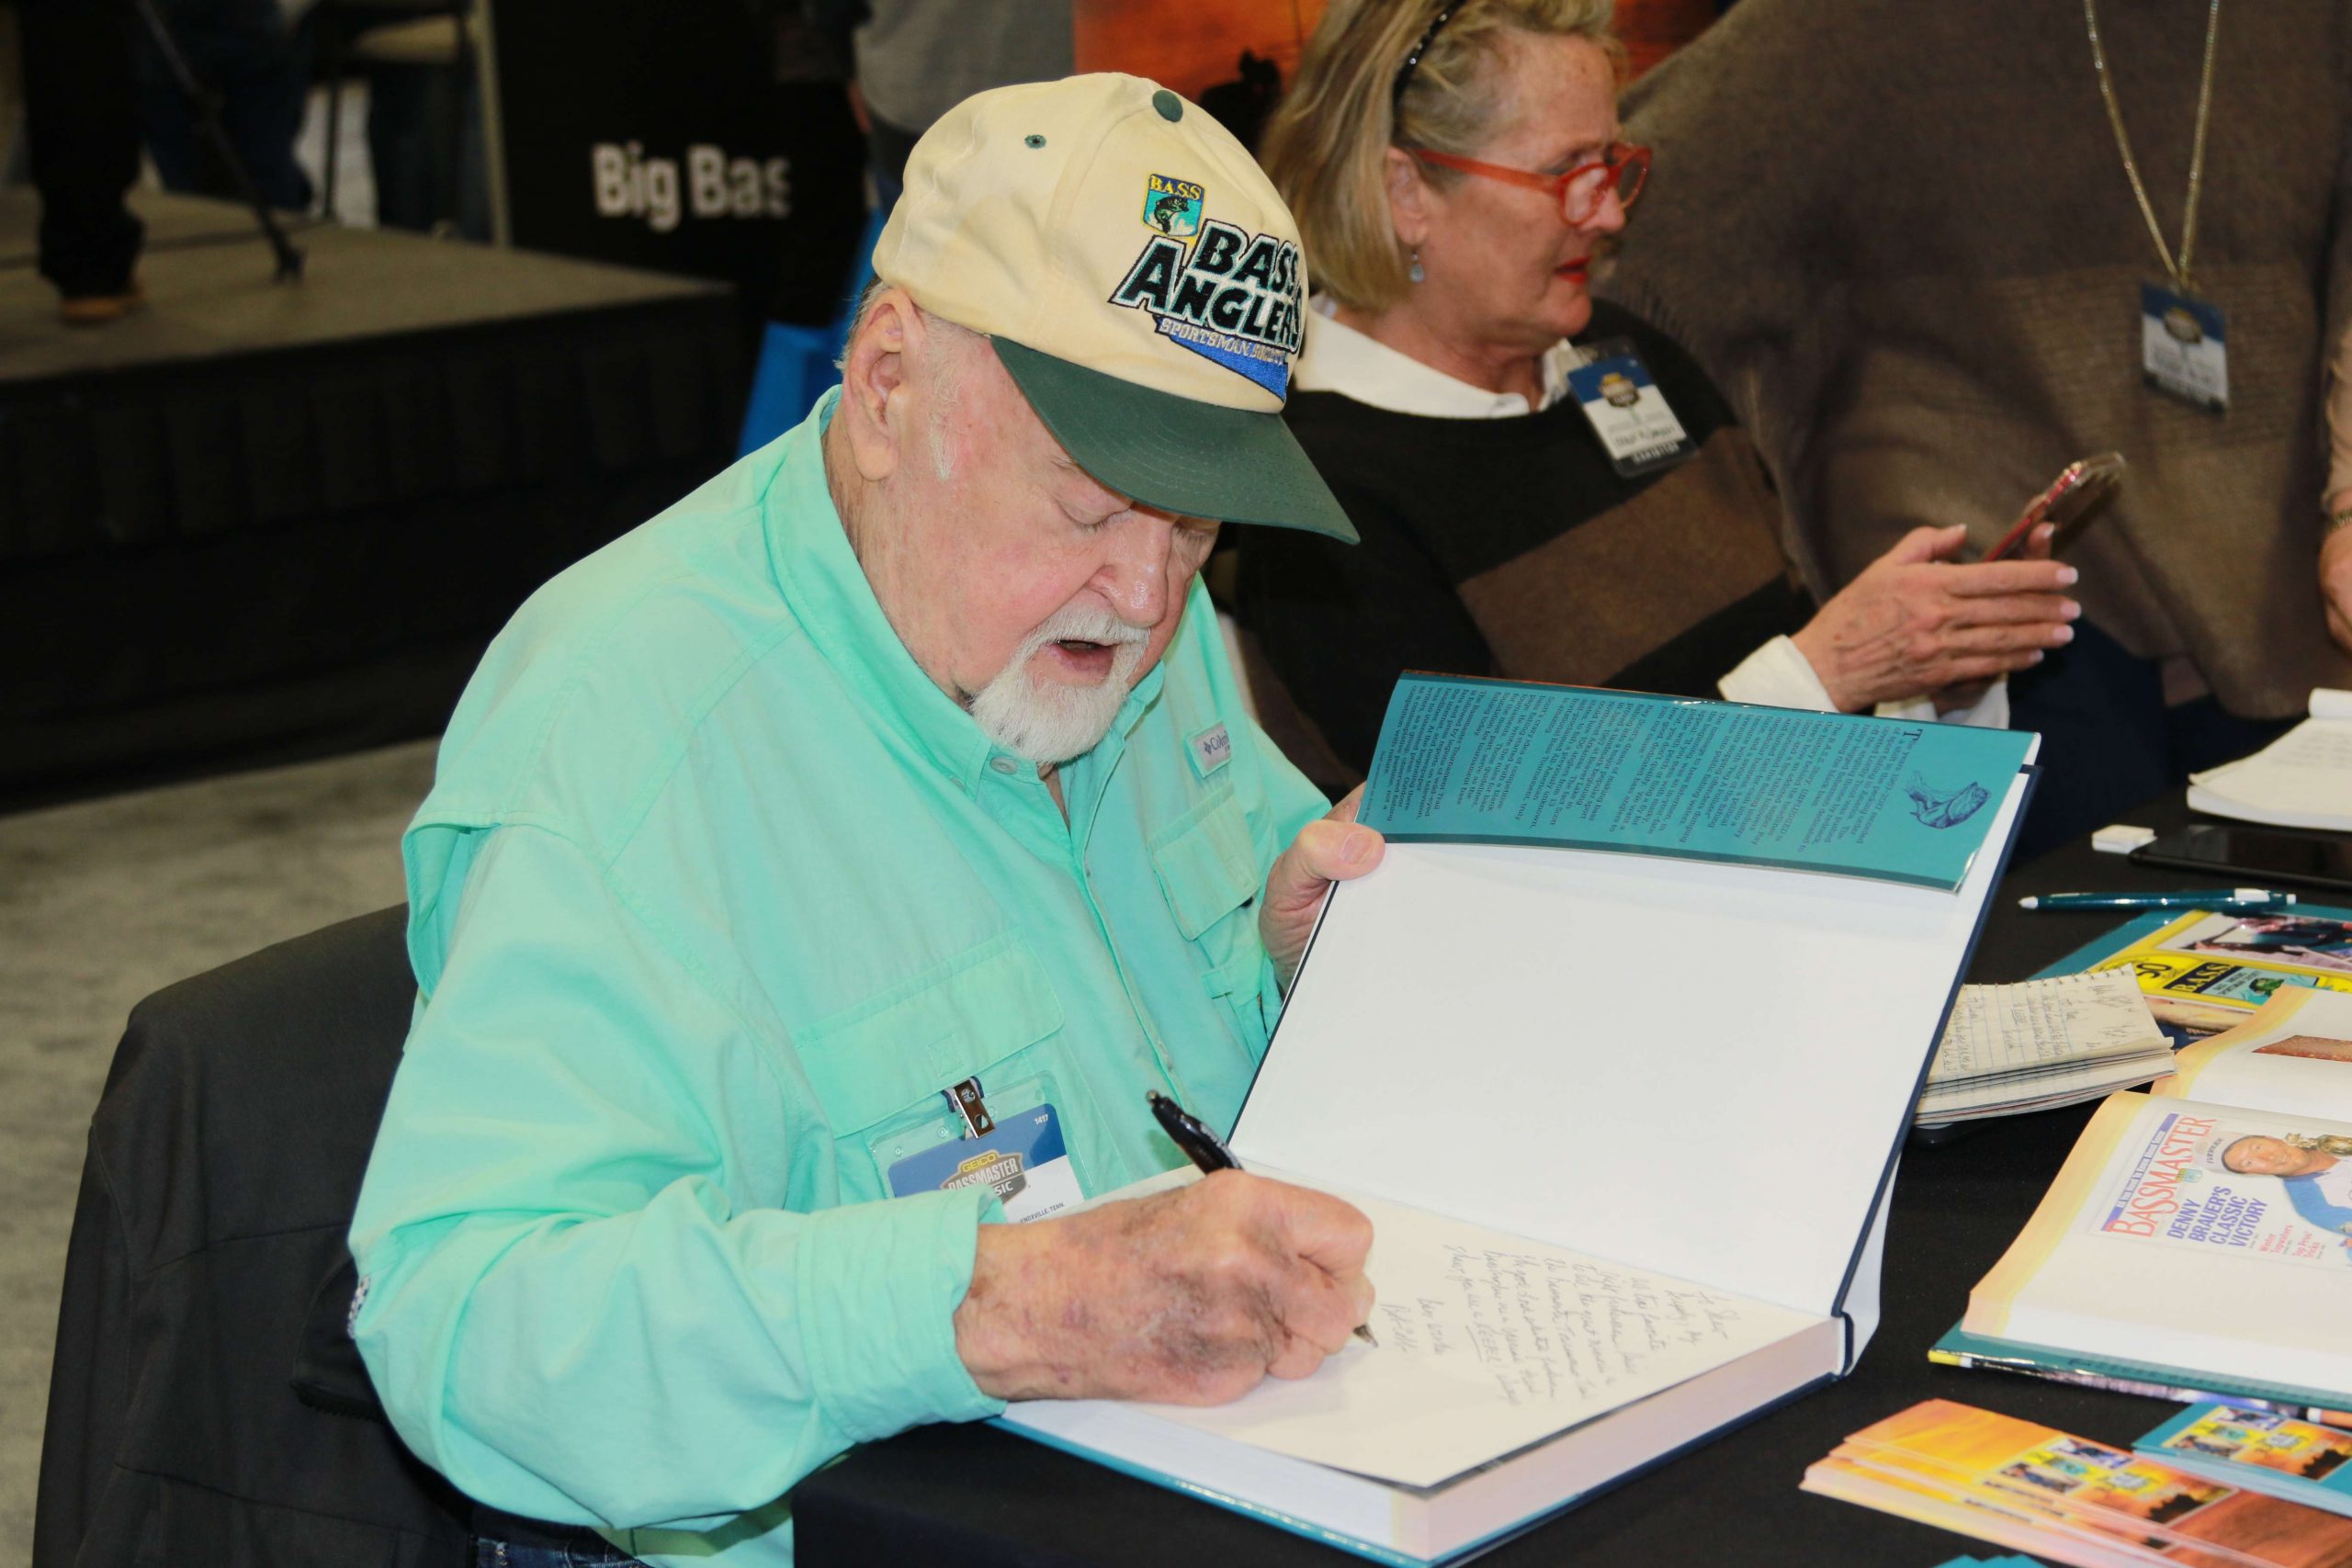 The legendary Bob Cobb signs autographs during the Bassmaster Classic Expo.
